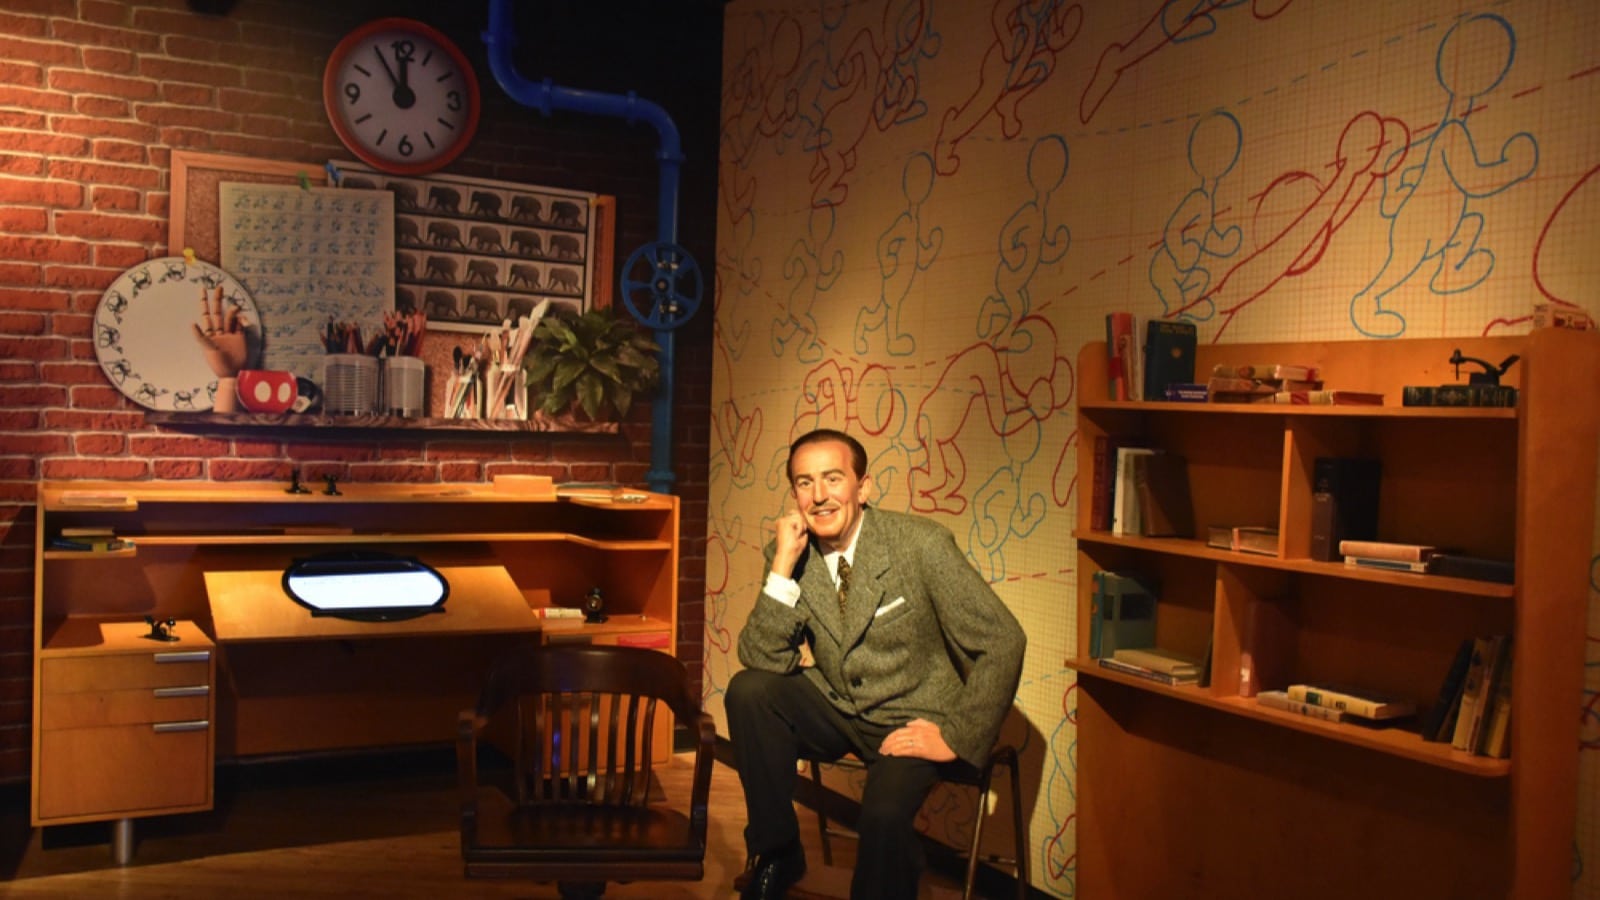 ORLANDO, FL – NOV 24: Walt Disney at Madame Tussauds Wax Museum in Orlando, Florida, on Nov 24, 2019. It displays waxworks of historical figures, film and TV characters and sports personalities.